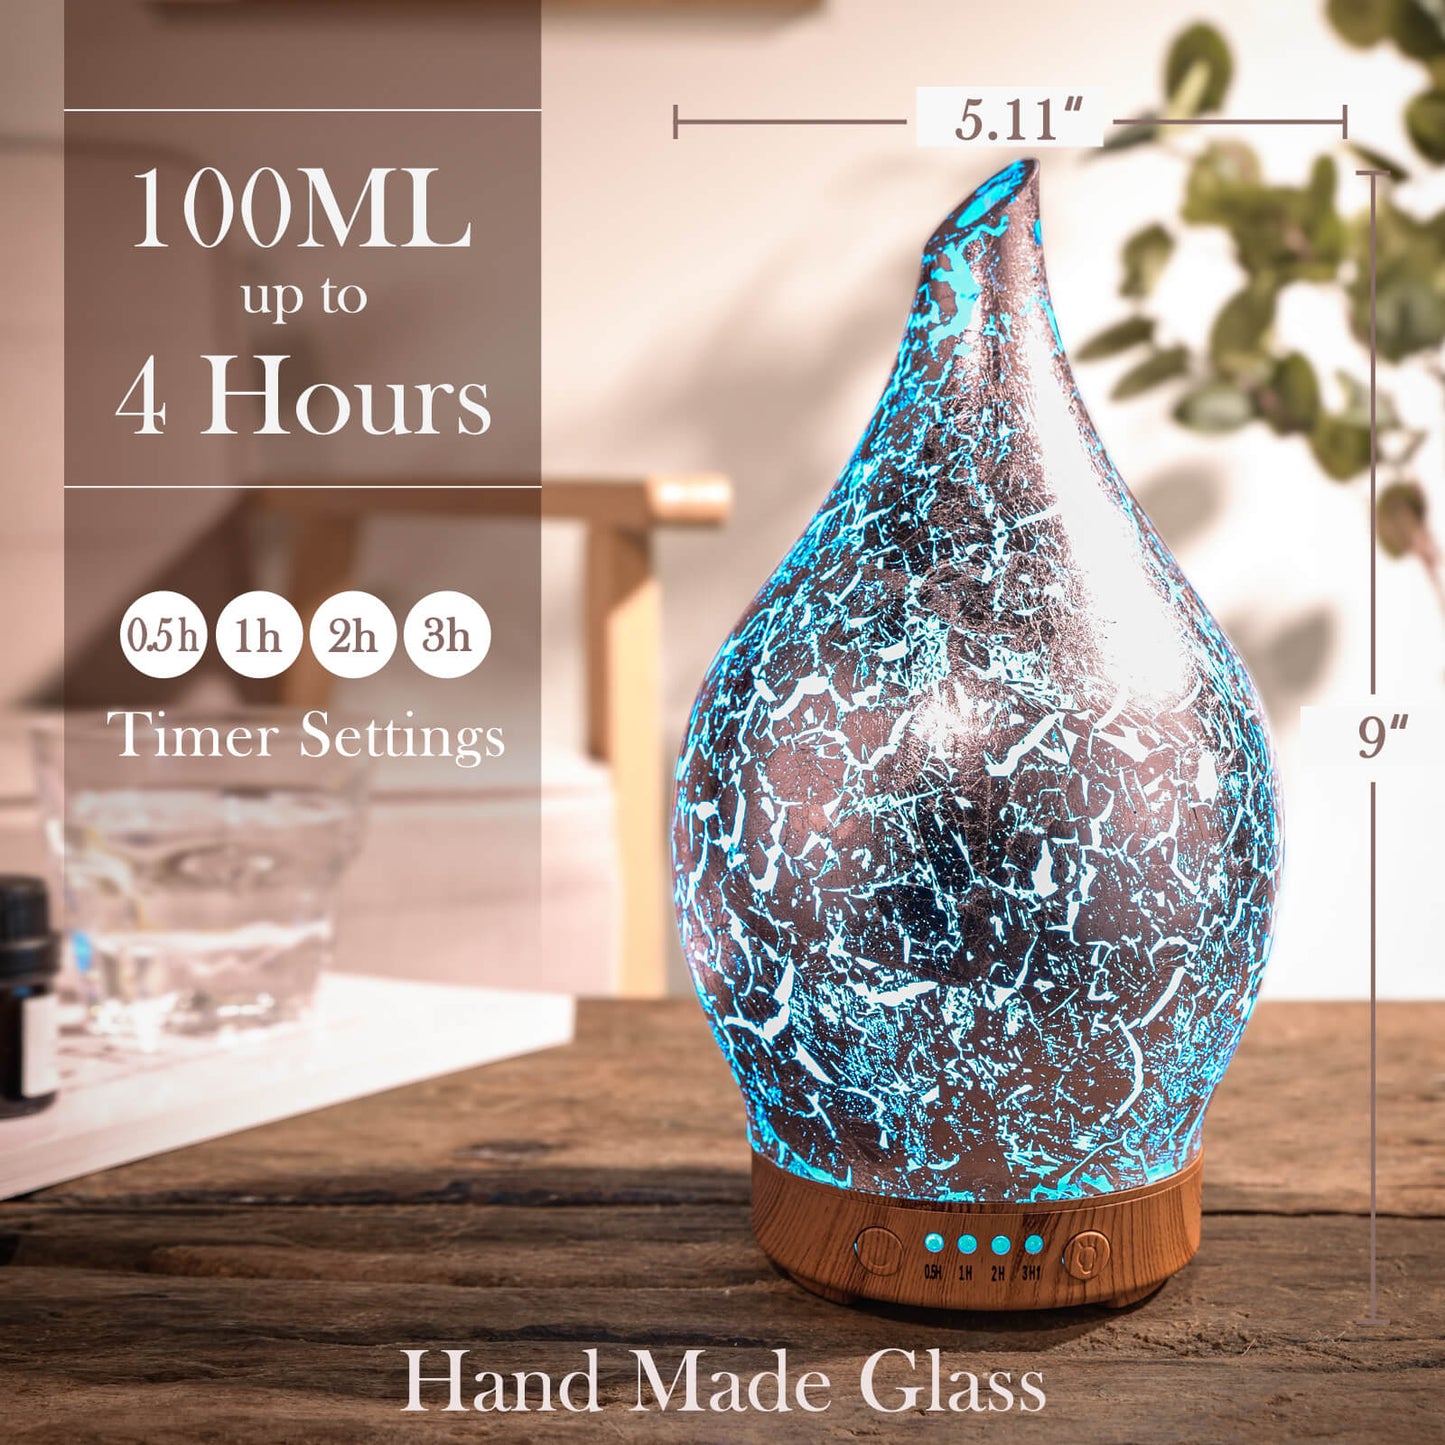 Essential Oil Diffuser Aromatherapy Diffusers for Therapeutic Oils - Ultrasonic Vase Cover & Special Silver,Cool Mist,Air Humidifier for Home, Office, Spa,Gym